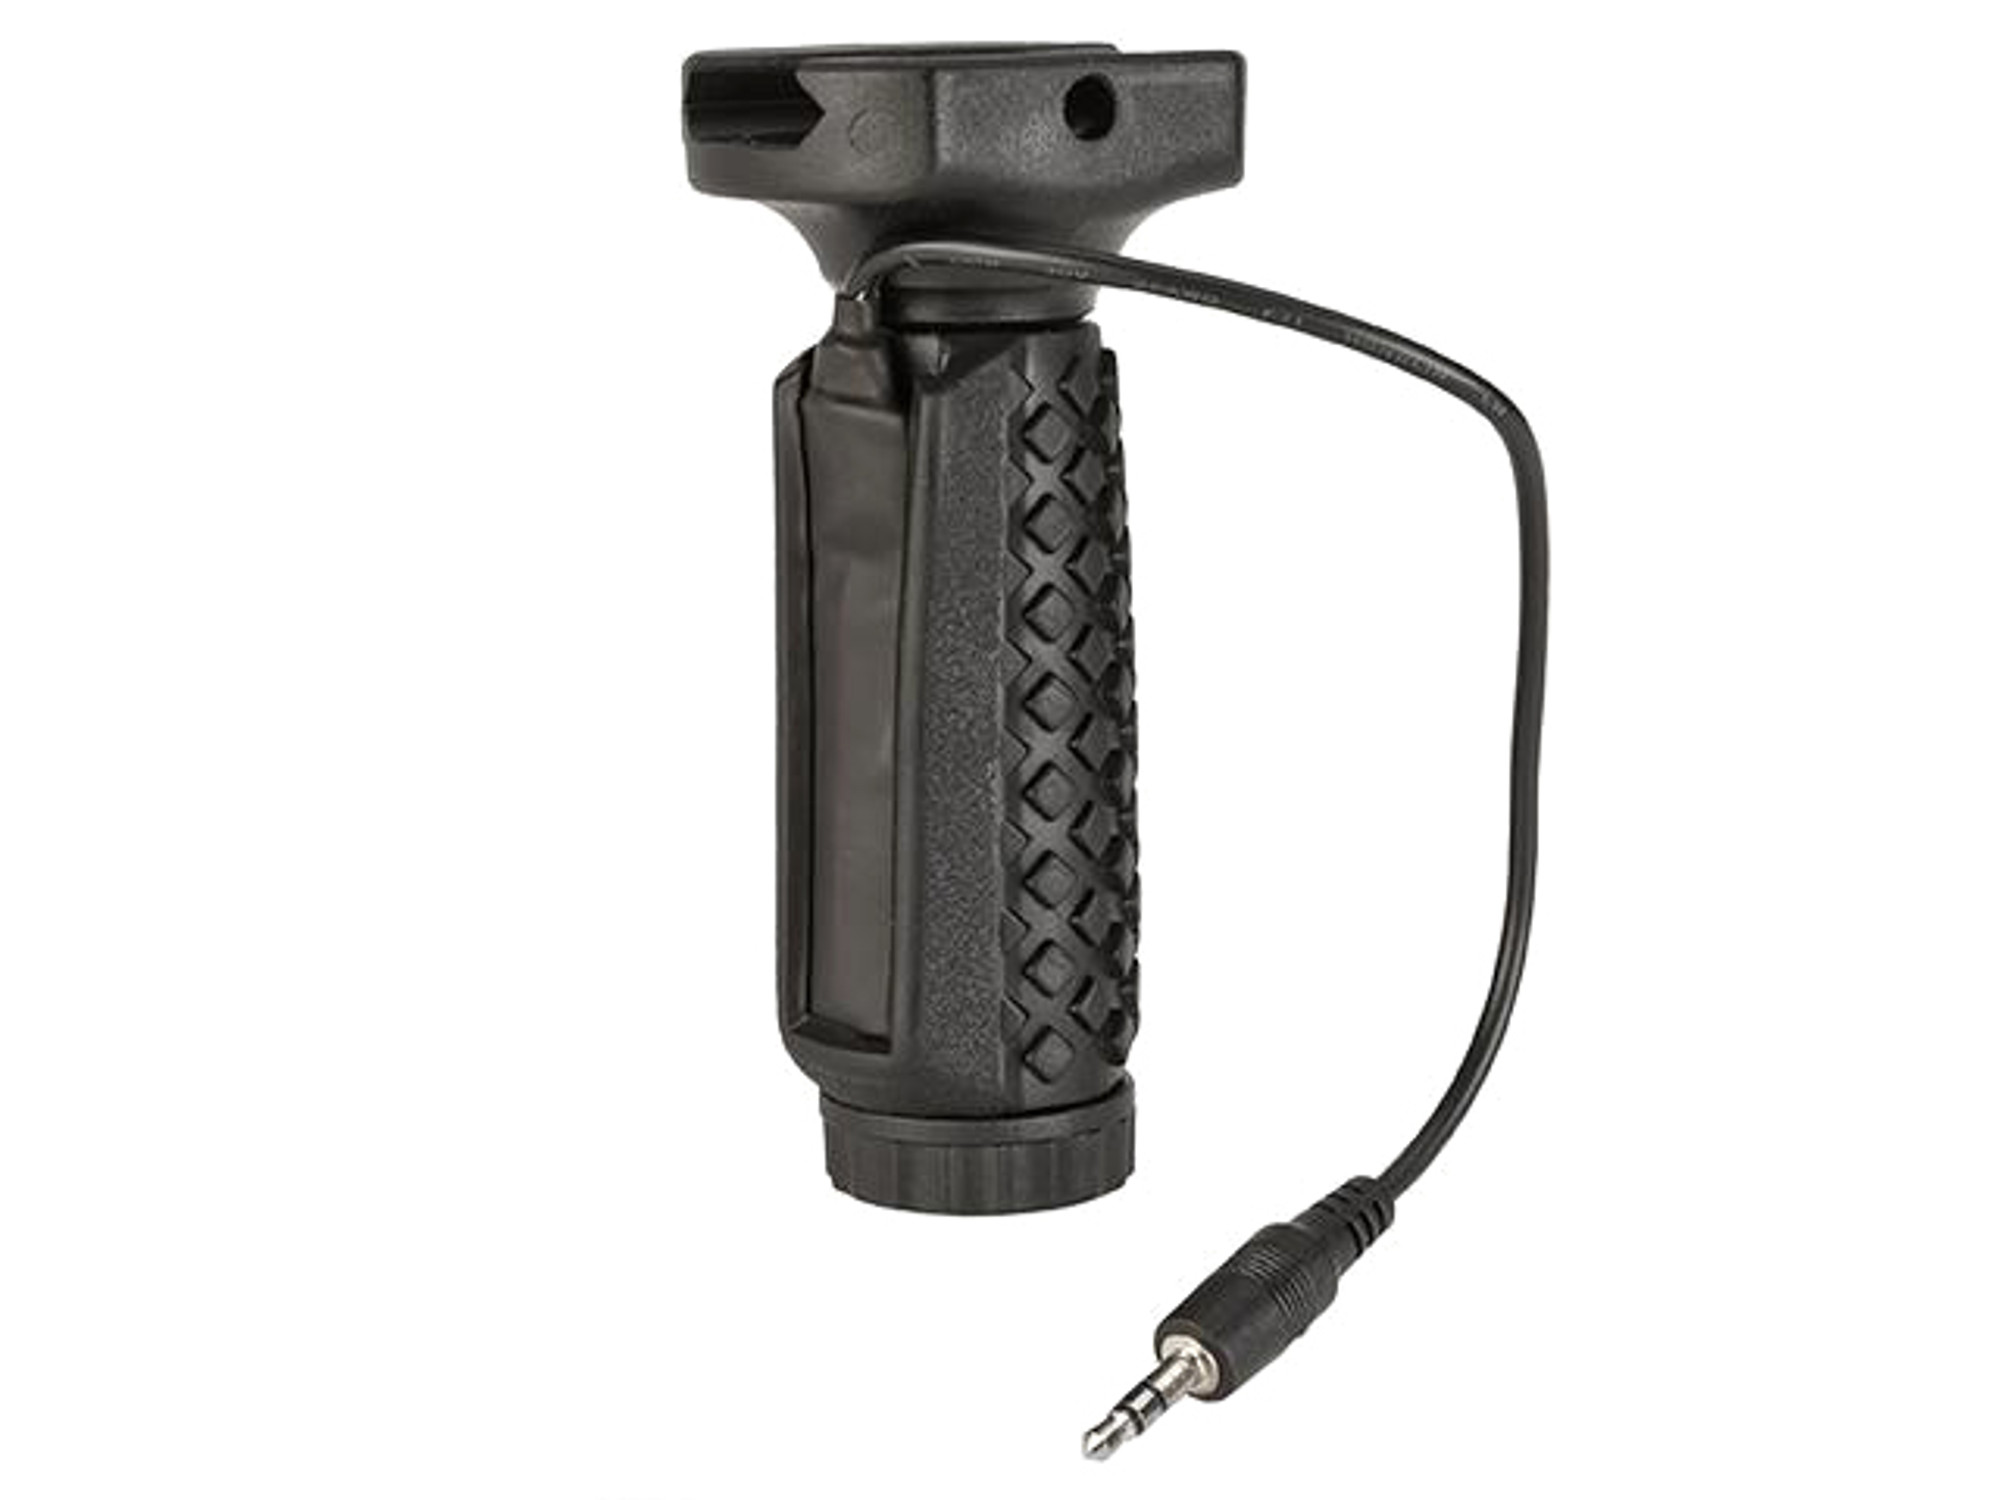 G&P Tactical Remote Switch Polymer / Rubber Vertical Grip - Black w/ Switch (Long)